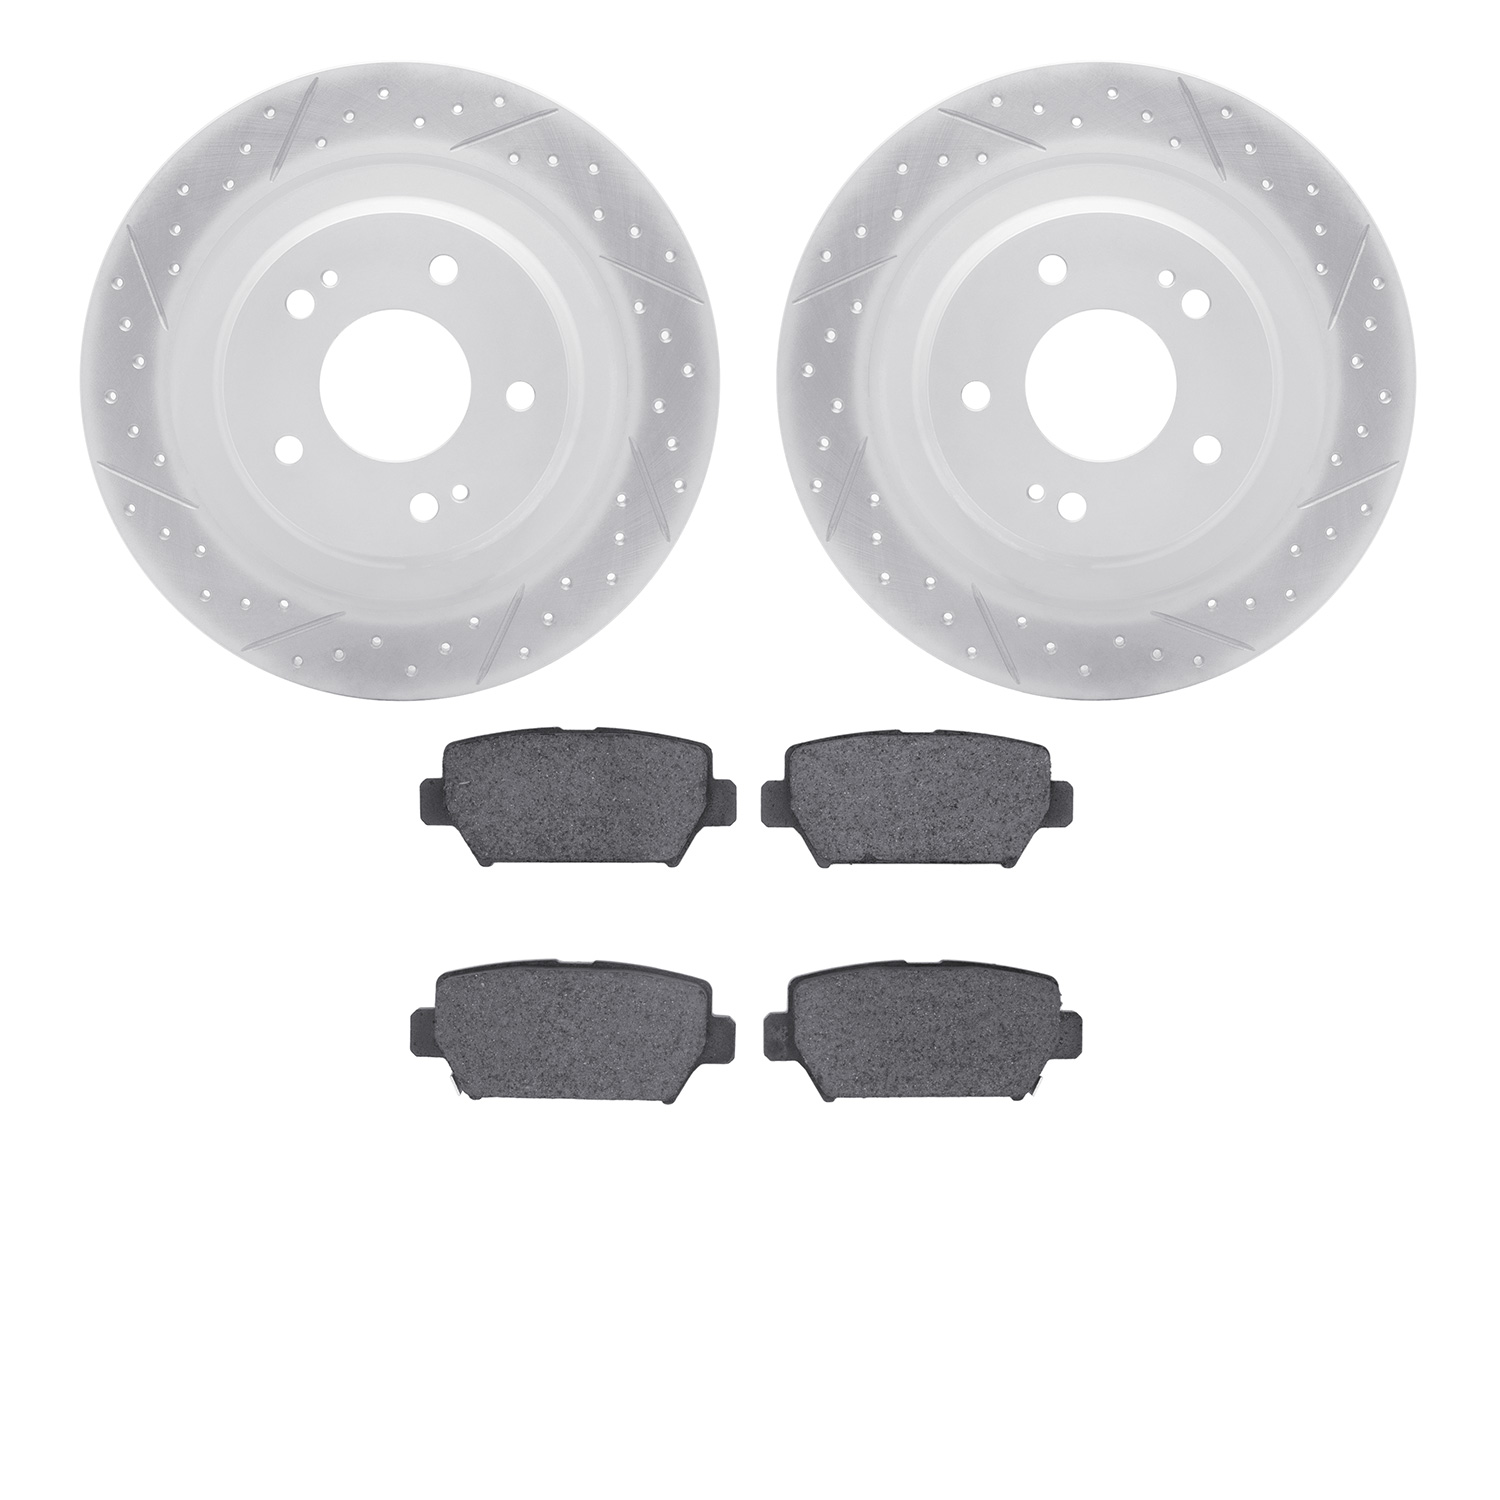 2502-72036 Geoperformance Drilled/Slotted Rotors w/5000 Advanced Brake Pads Kit, Fits Select Mitsubishi, Position: Rear